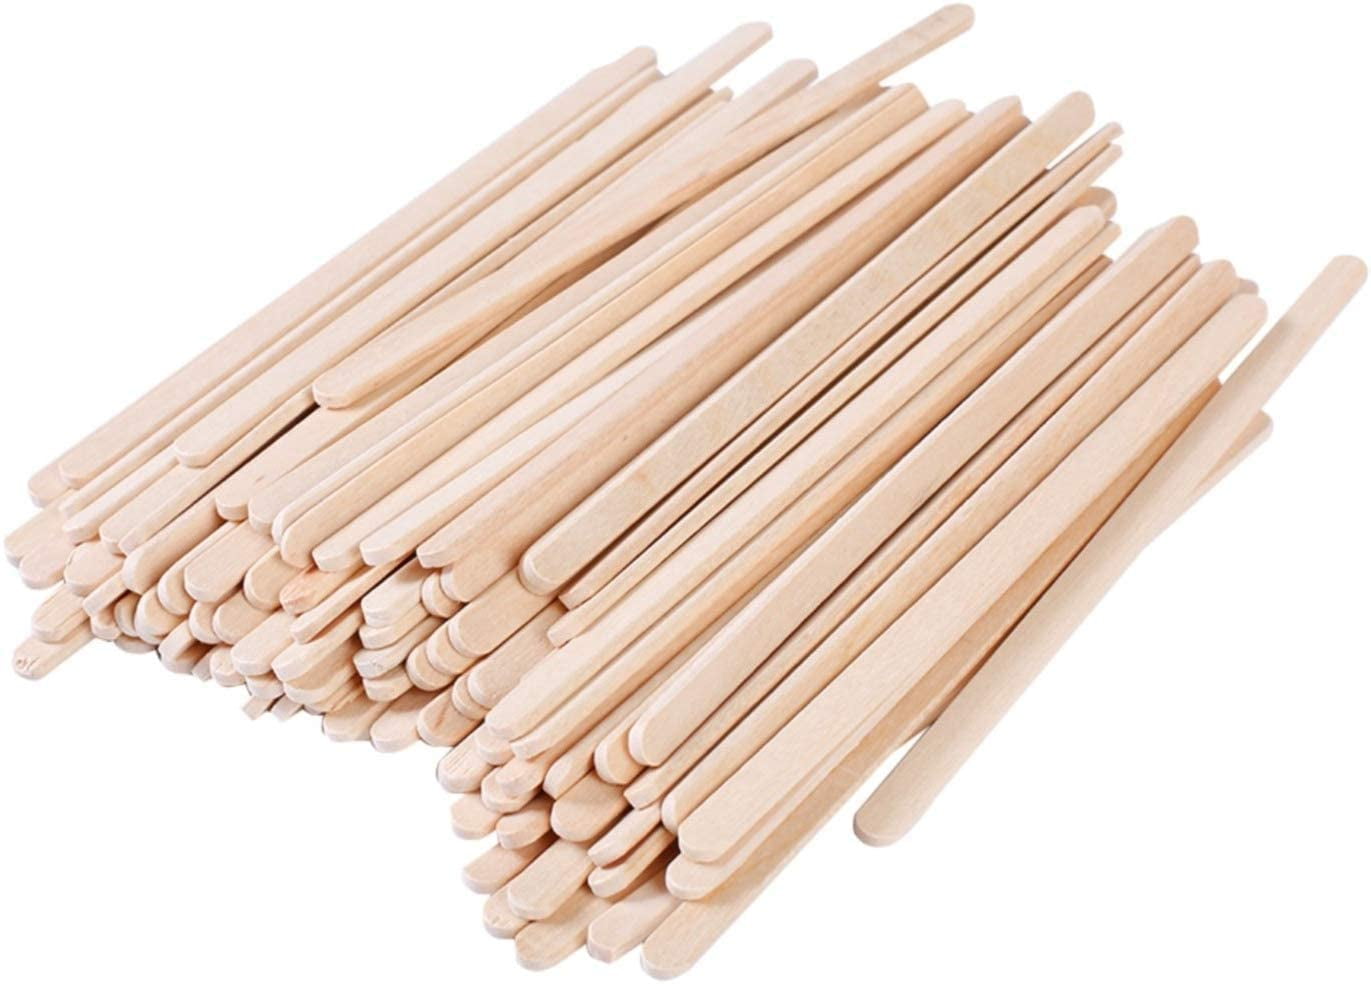 Wood Coffee Stirrers 5.5 1000 Box Beverage Stir Sticks Disposable Biodegradable Compostable Coffee Stick for Party BBQ Camping resturant 